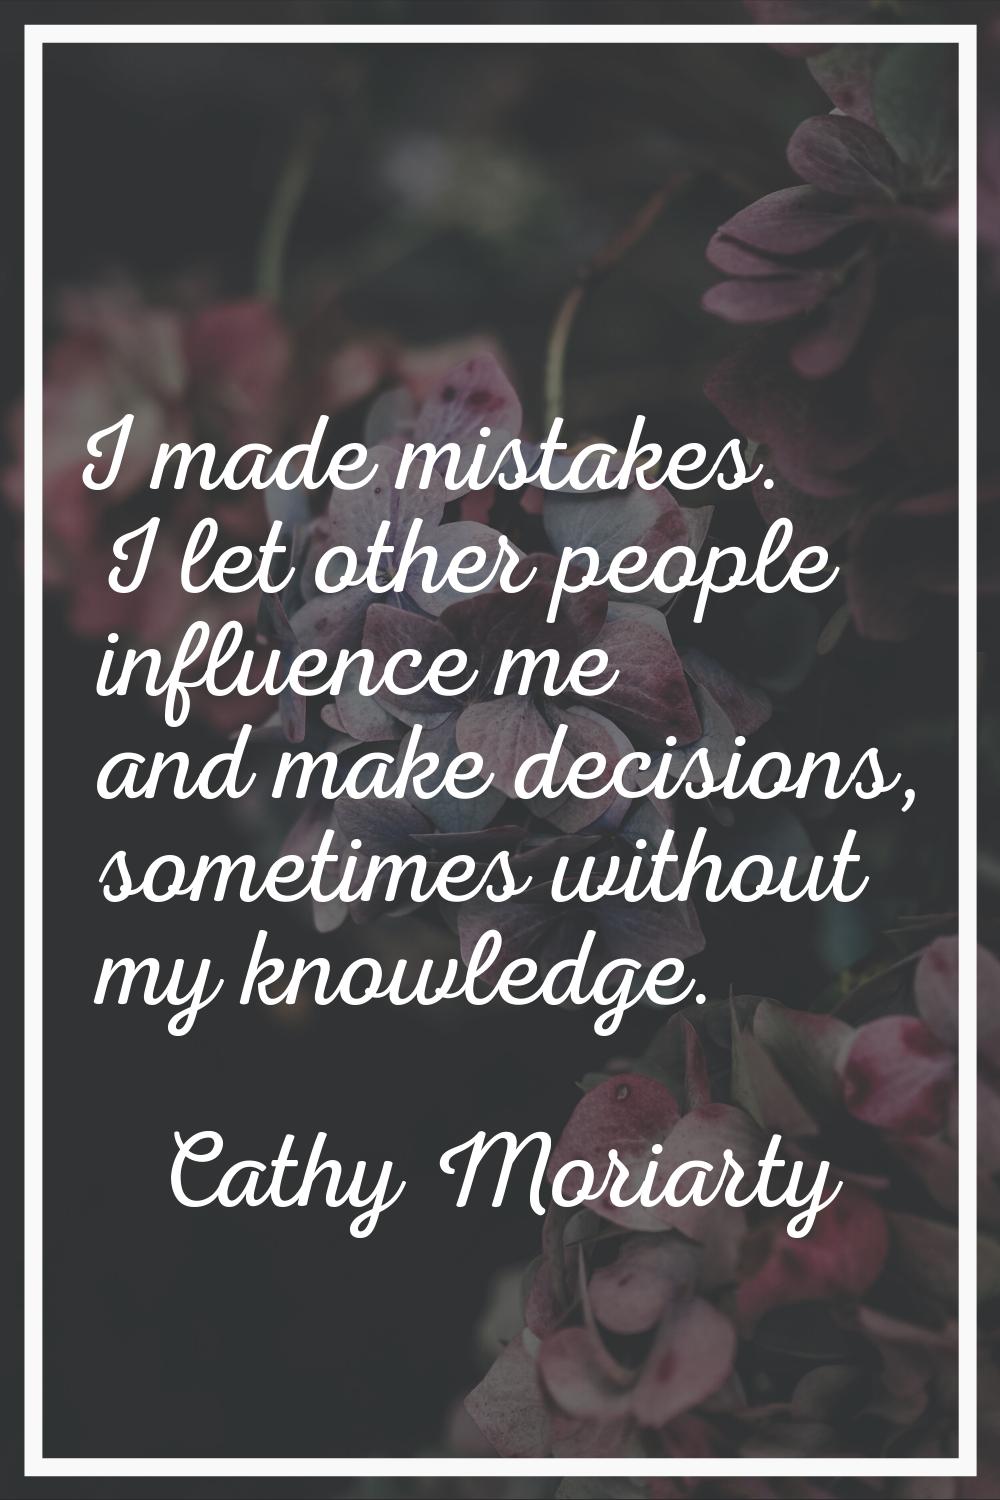 I made mistakes. I let other people influence me and make decisions, sometimes without my knowledge